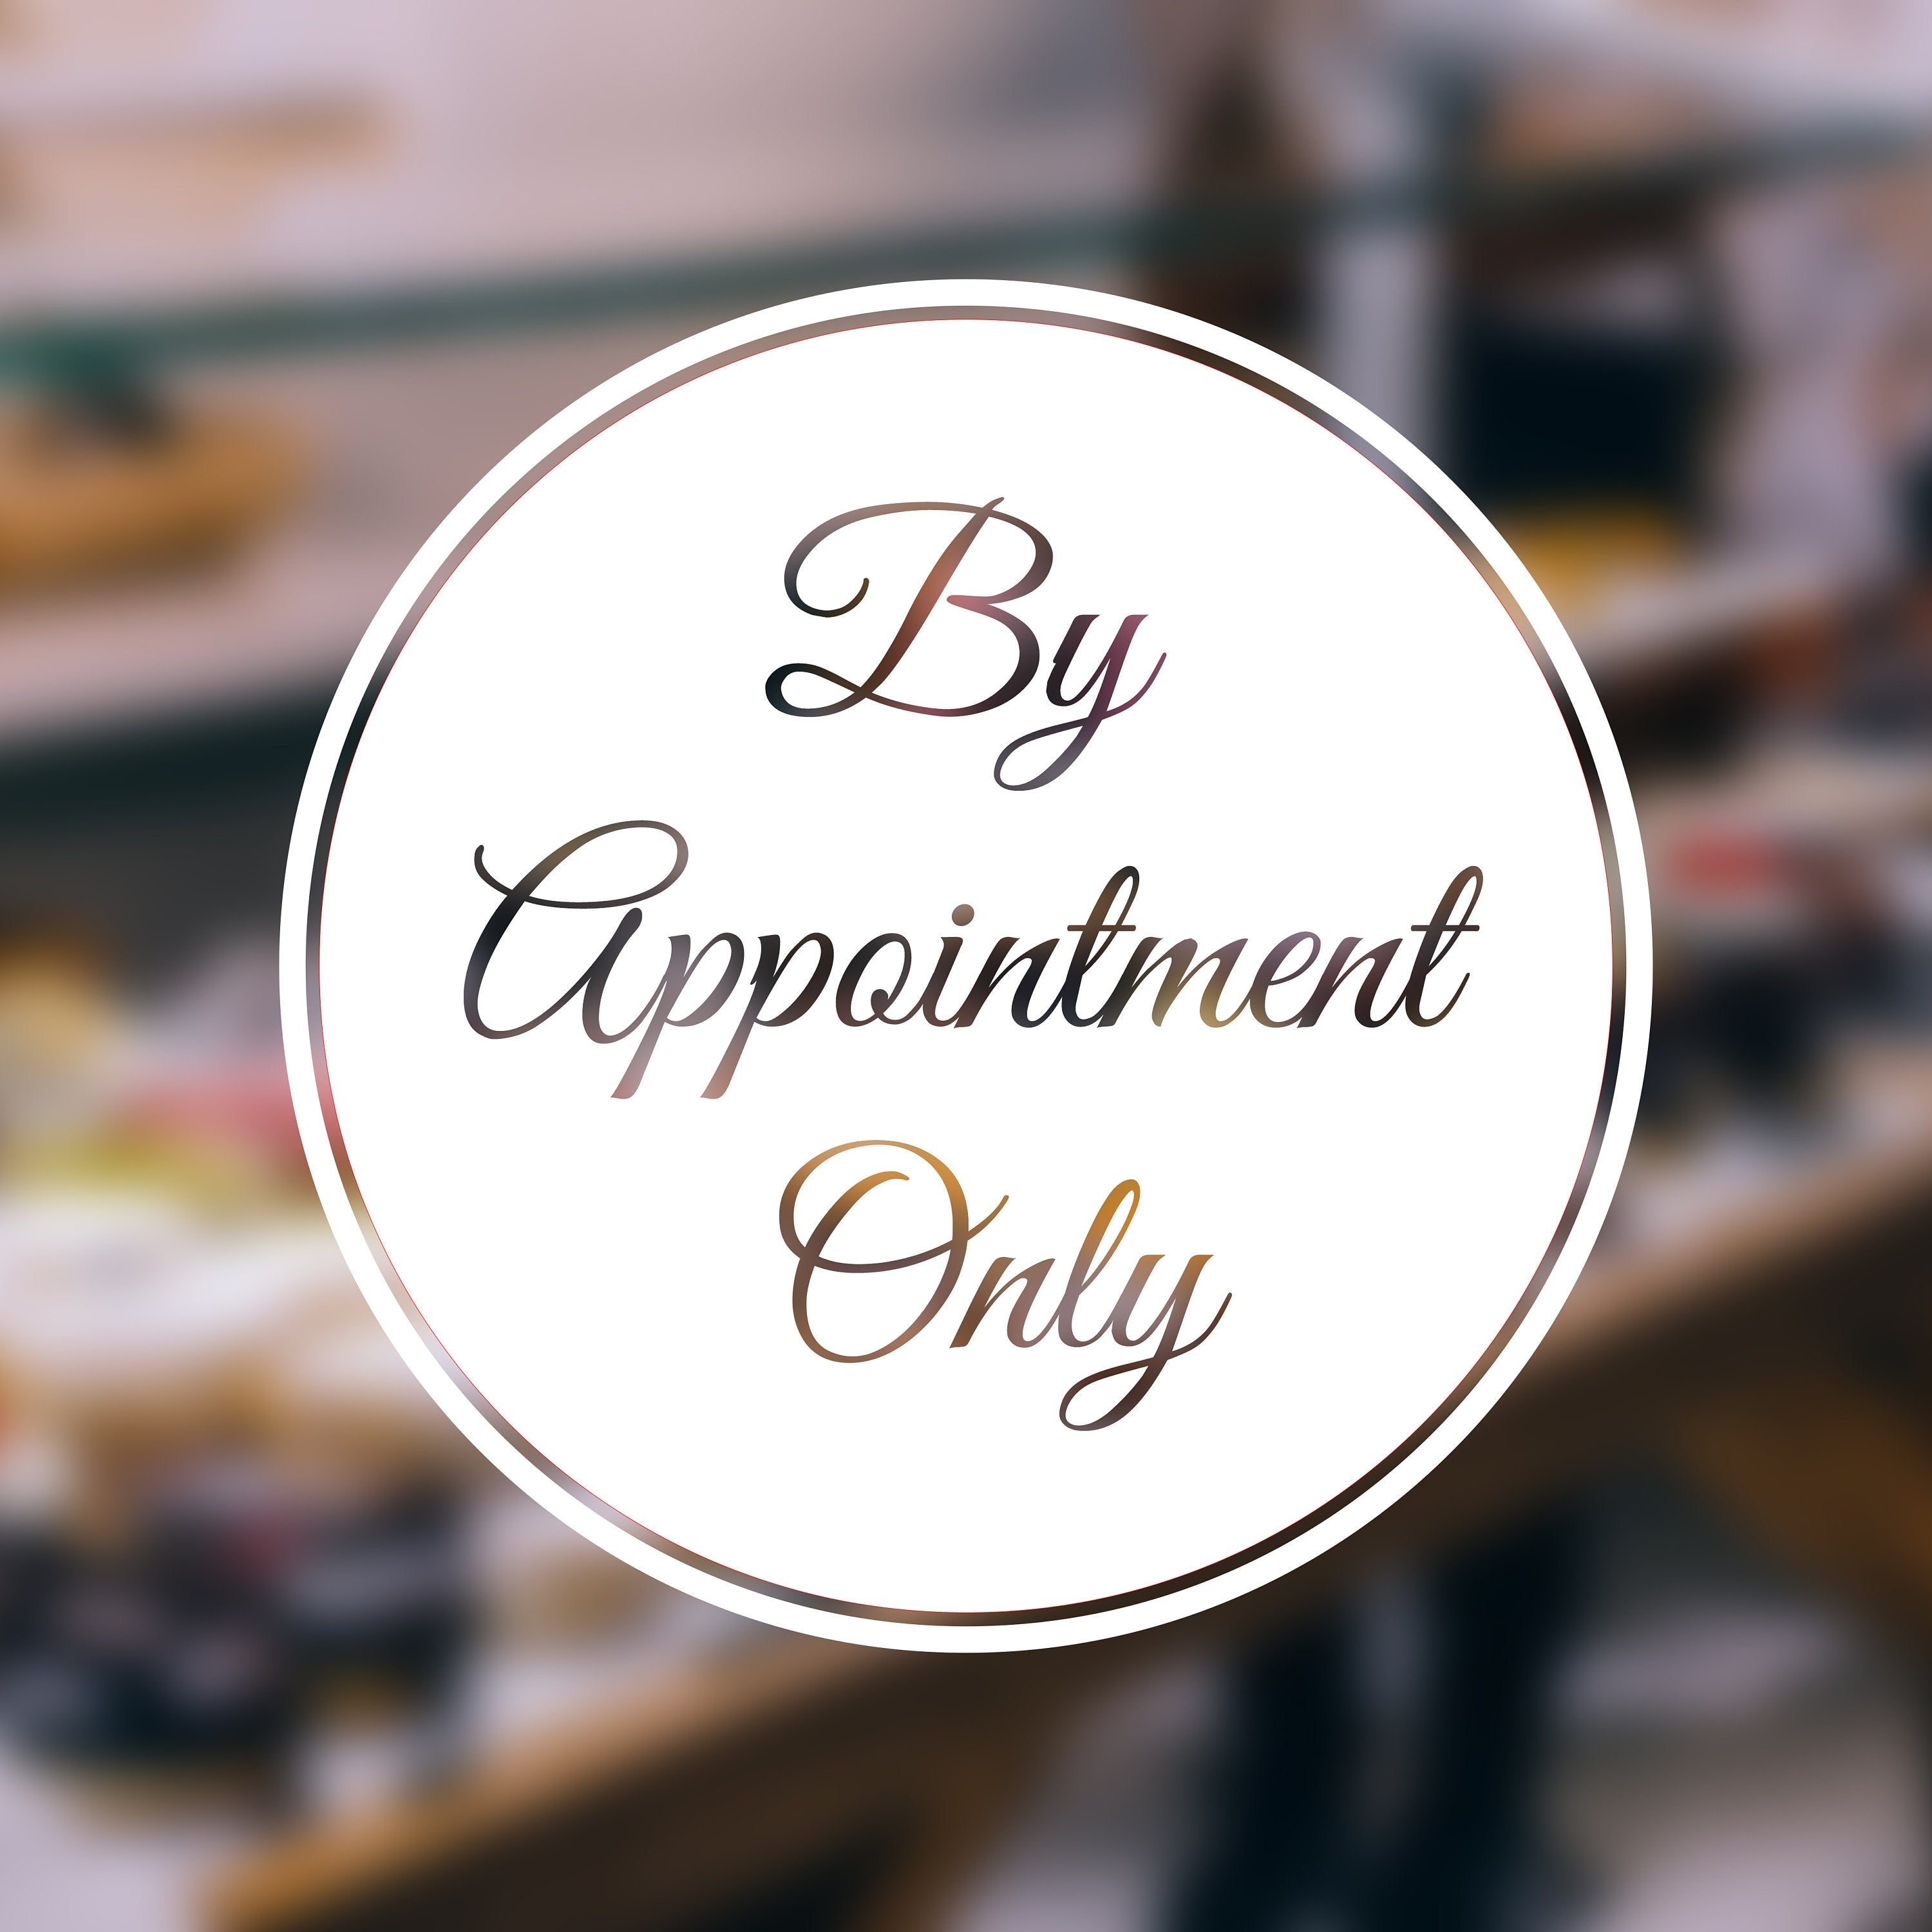 By Appointment Only - Social Distancing Vinyl Decal for Businesses, Stores, Shops, Restaurants, and More!